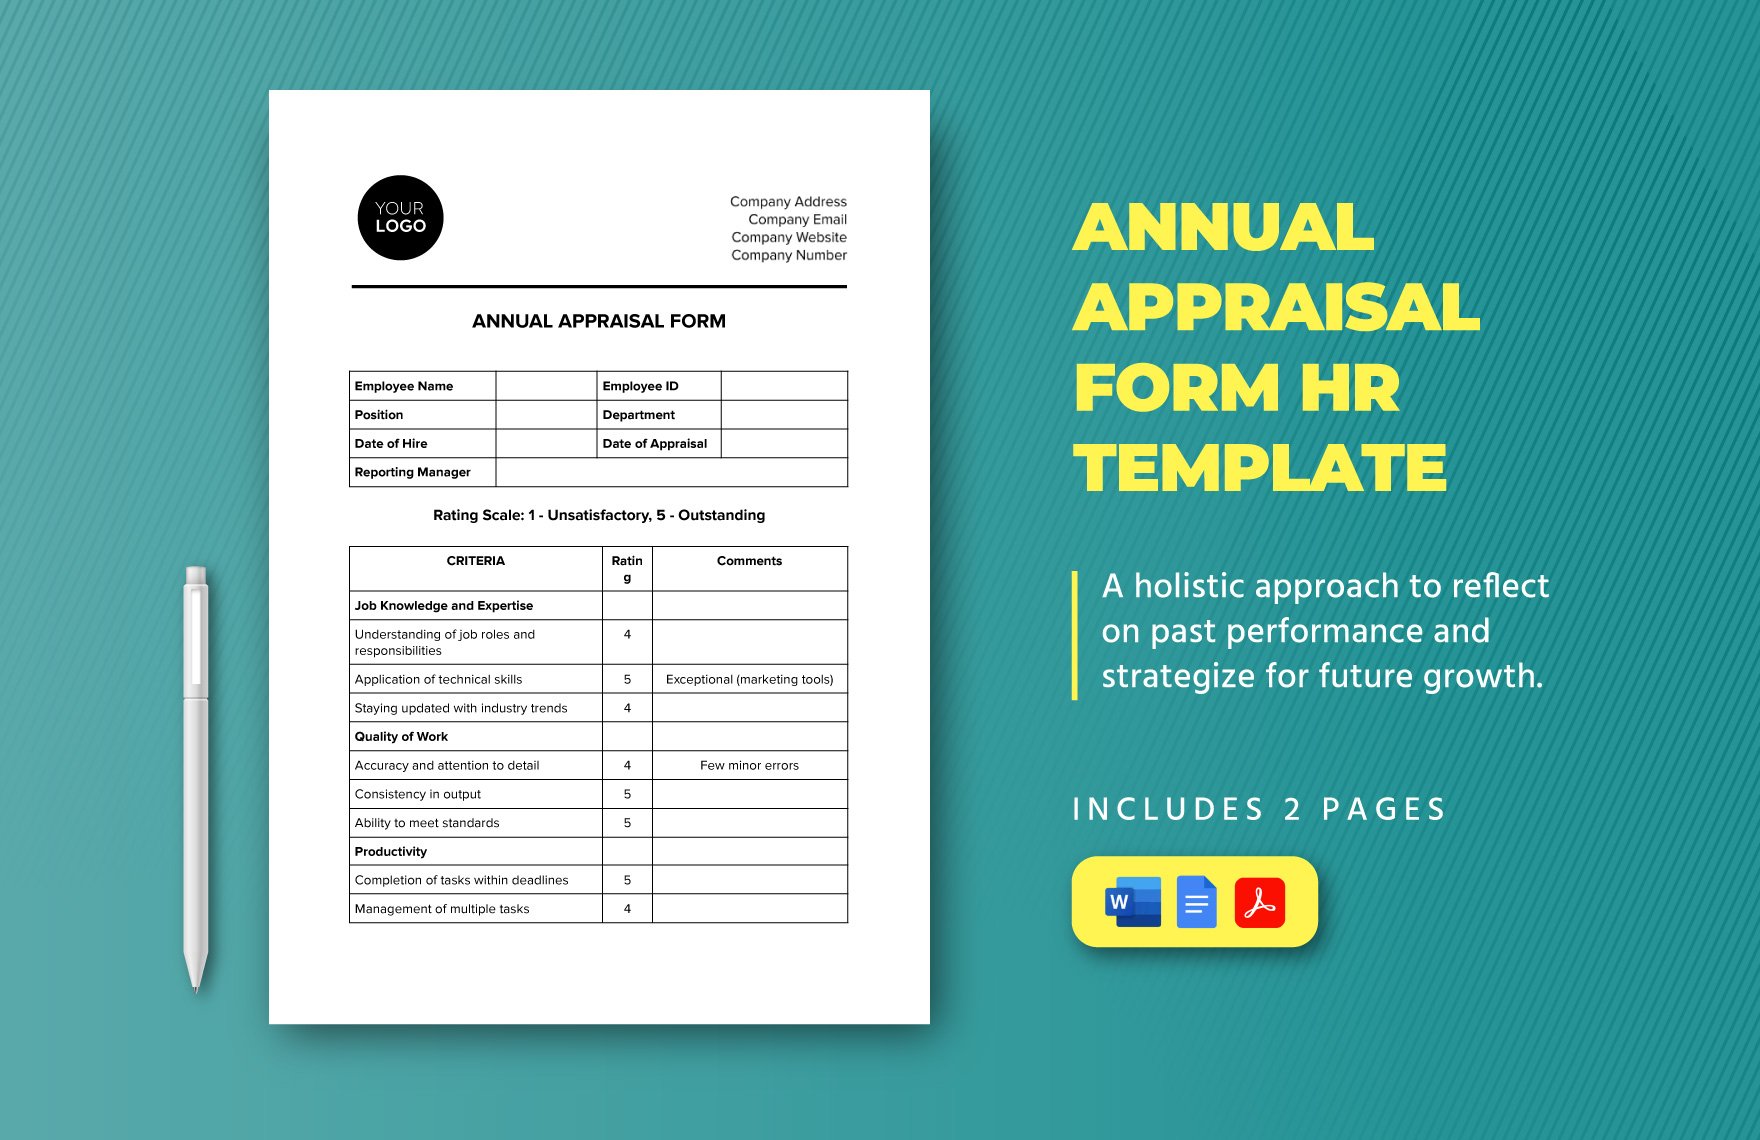 Annual Appraisal Form HR Template in Word, Google Docs, PDF